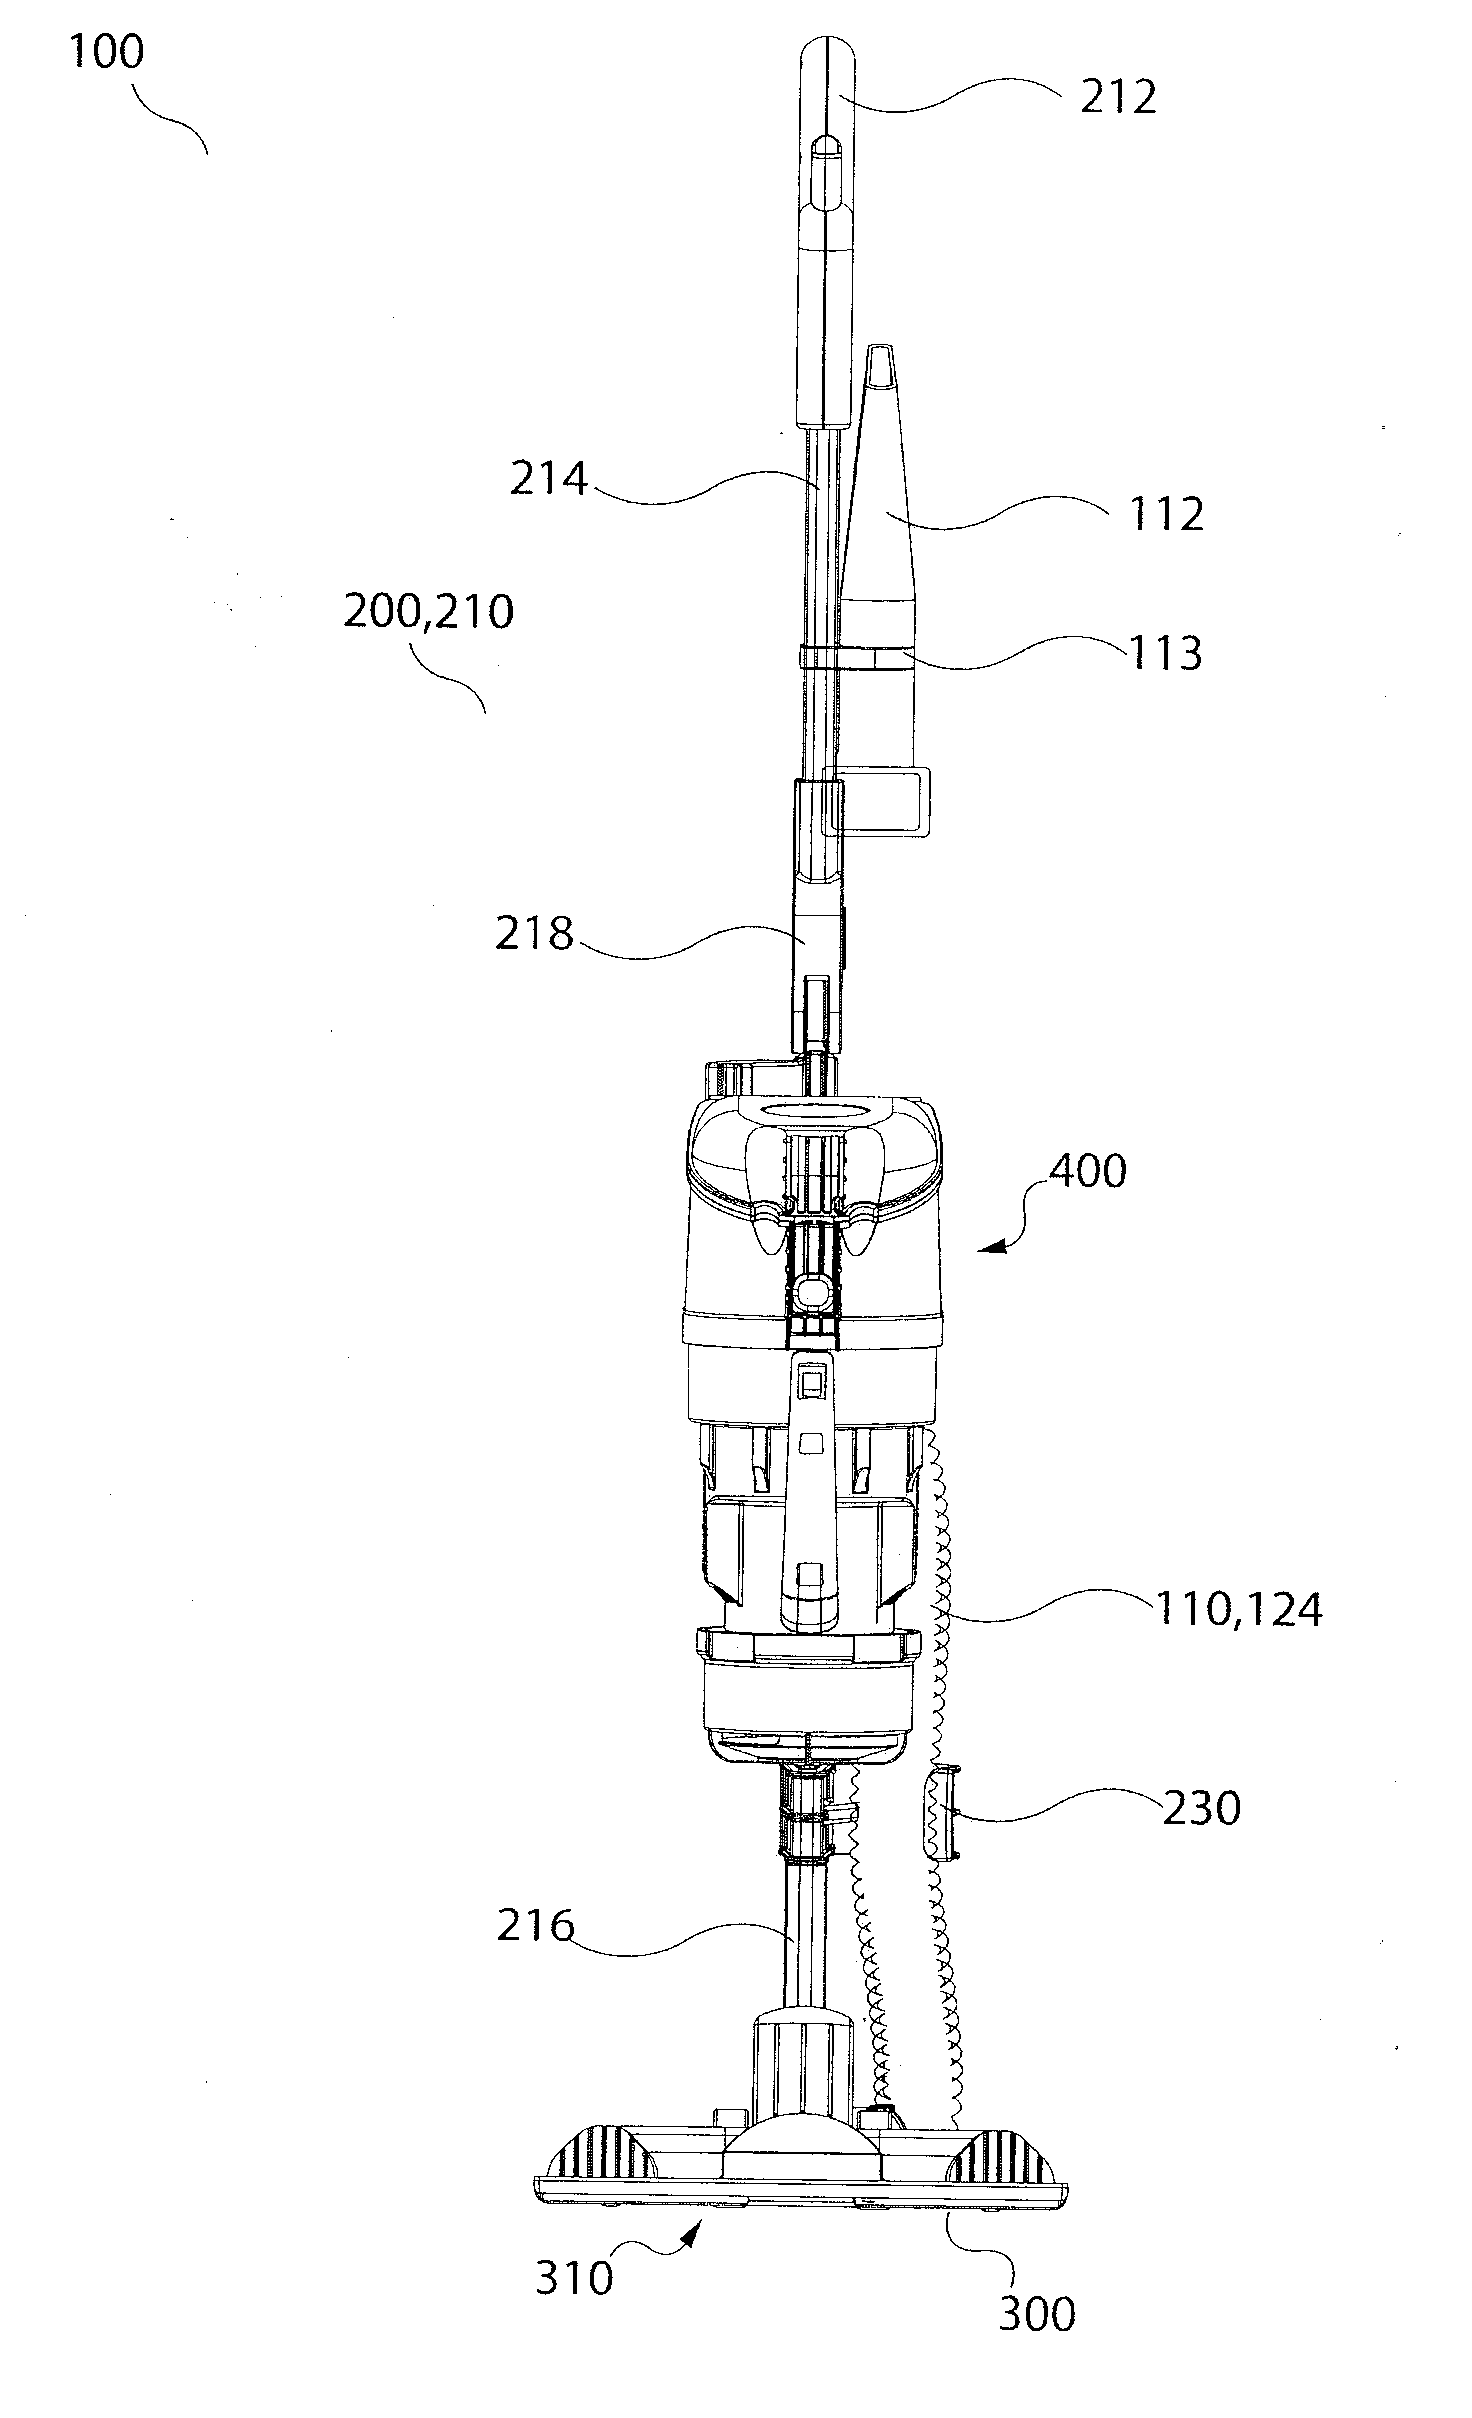 Surface cleaning apparatus with different cleaning configurations